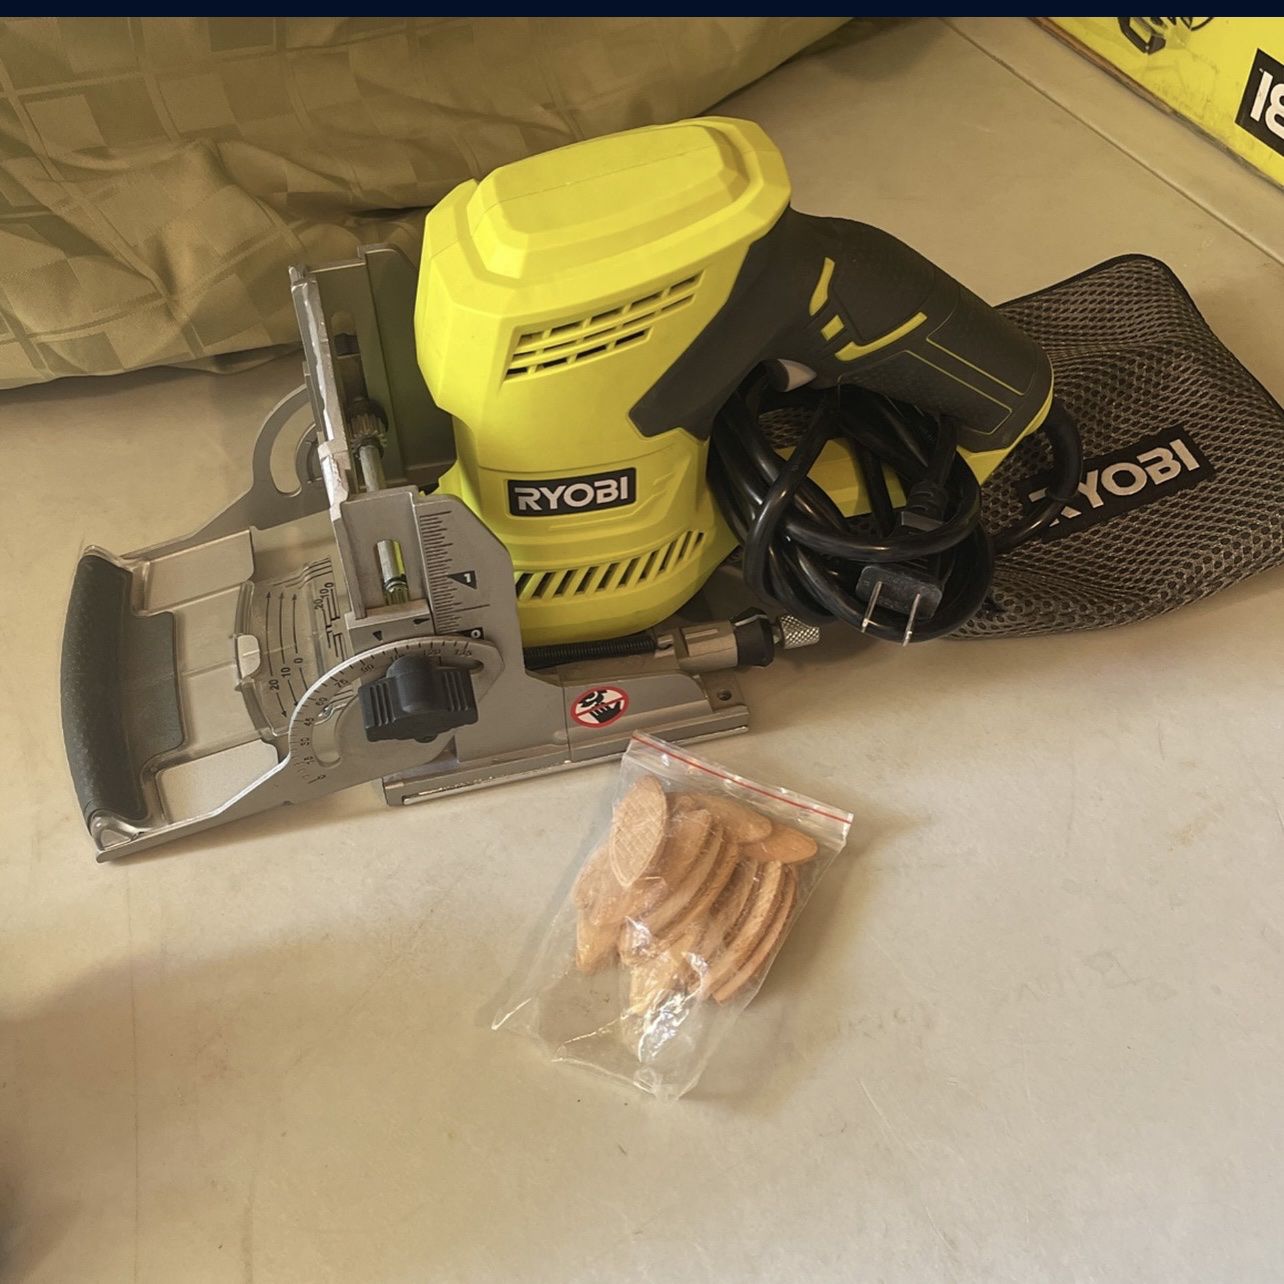 RYOBI Amp AC Biscuit Joiner Kit with Dust Collector for Sale in  Bakersfield, CA OfferUp